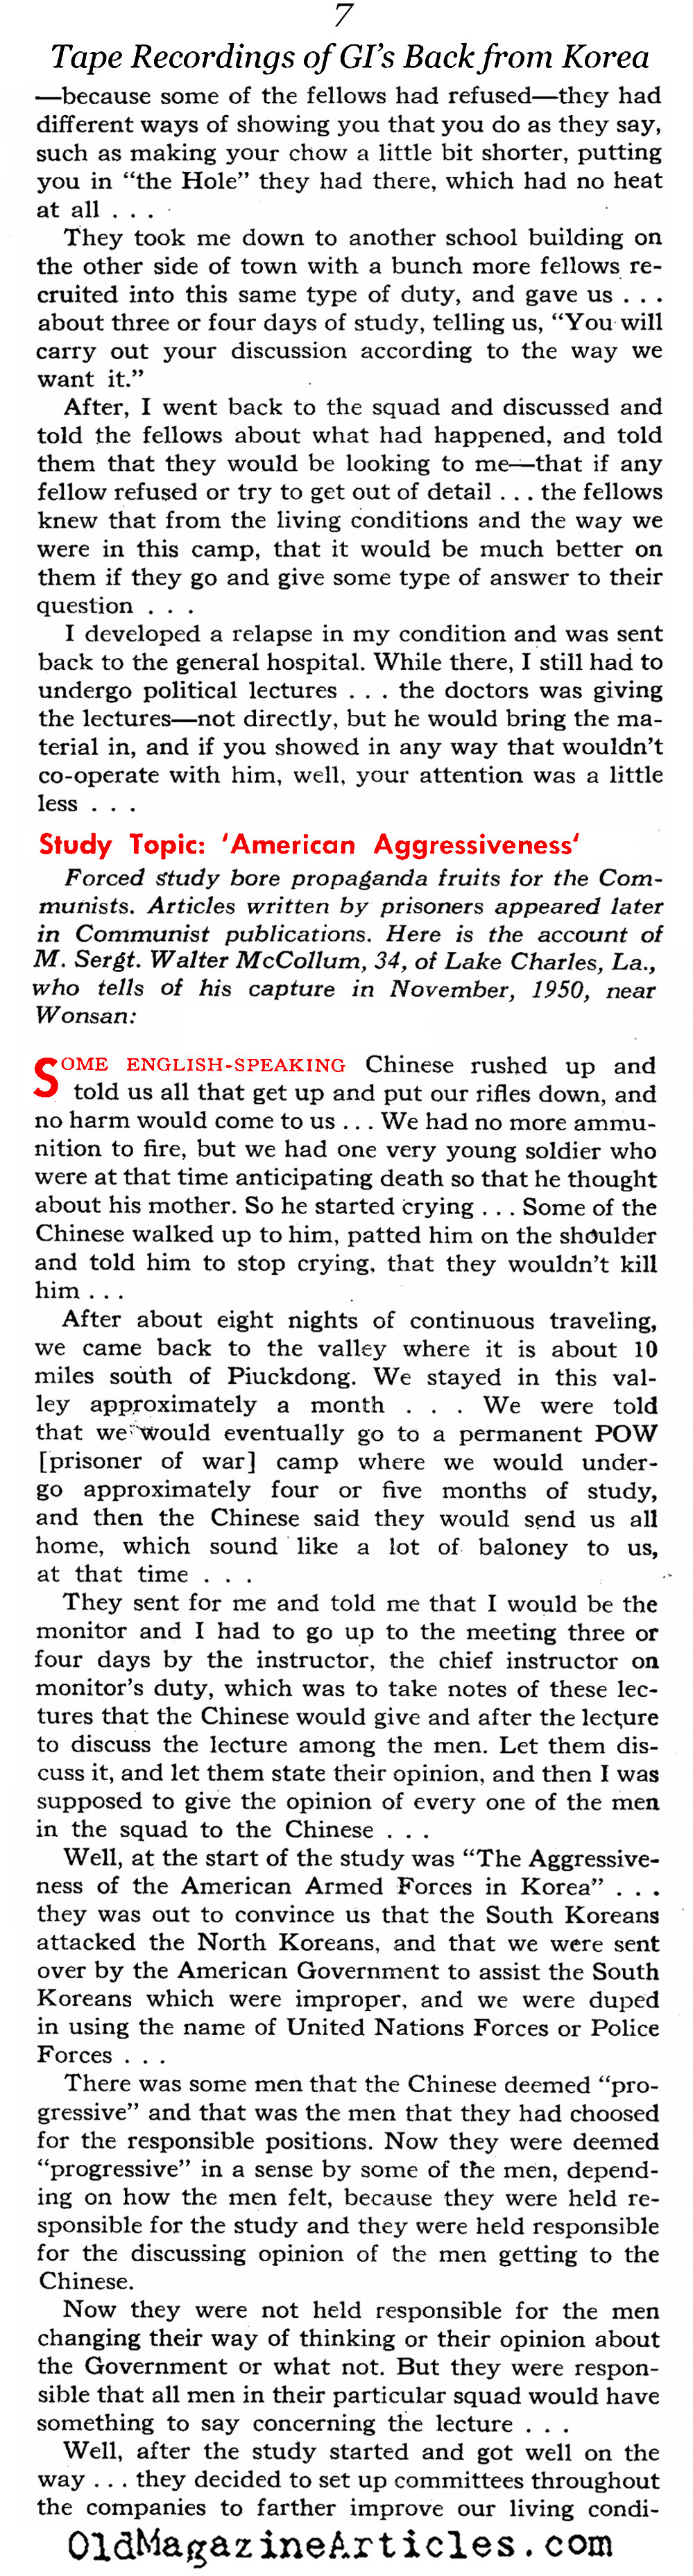 American POWs in North Korea (United States News, 1953)